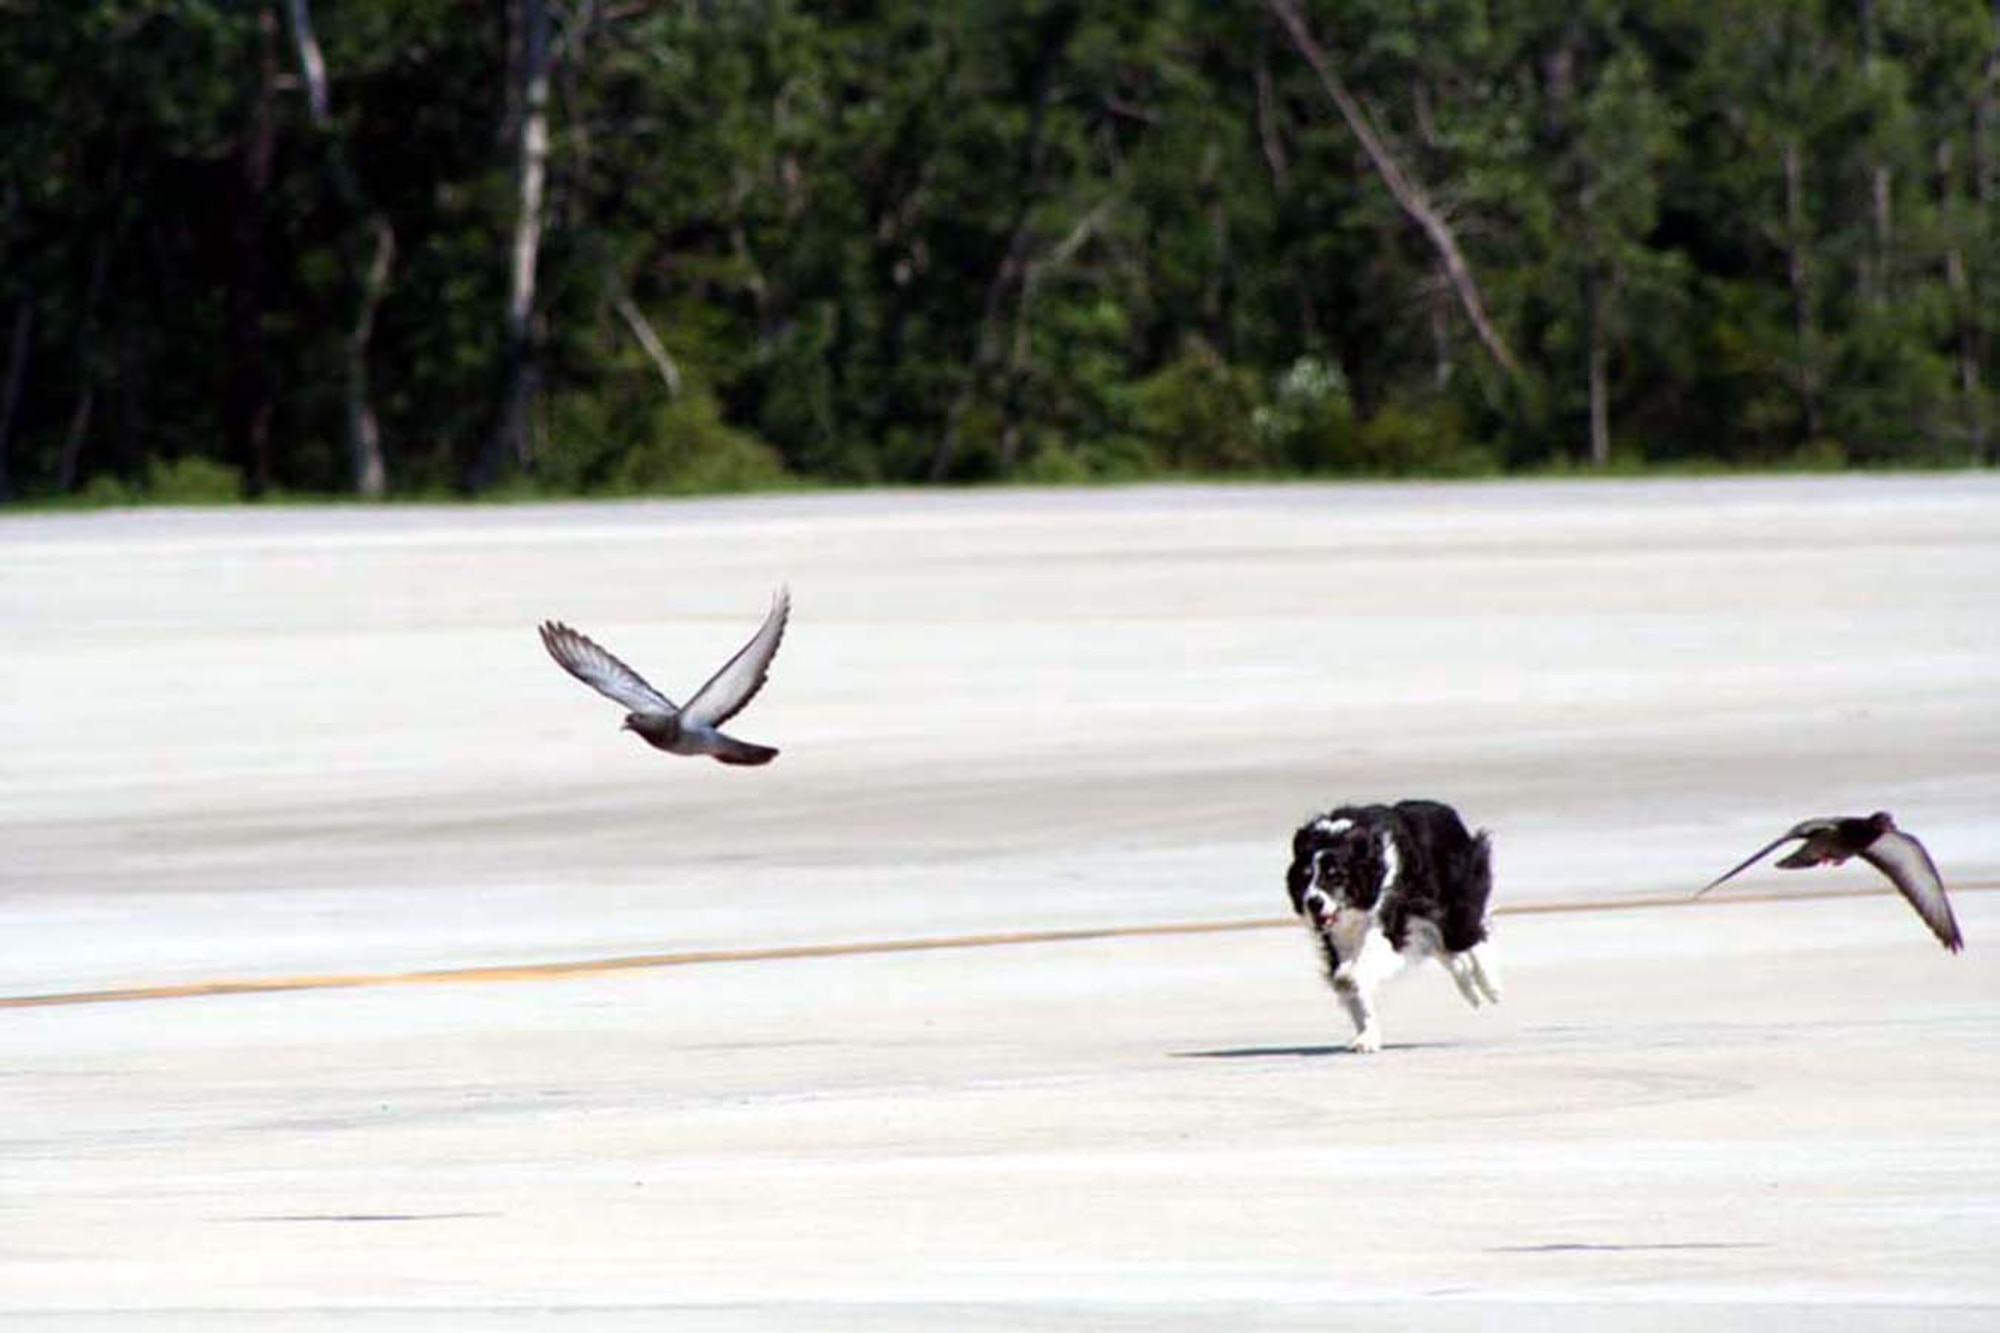 Rhett, Hurlburt Field's resident bird/wildlife aircraft strike hazard dog, chases pigeons off the runway before an aircraft takes off. Rhett works as a part of the 1st Special Operations Wing Groung Safety Office, helping to clear the runways, fields and hangars on base of potential wildlife hazards. With his constant patrolling, the birds, bears, alligators and other wild animals now view him as a predator and usually stay in the wilds surrounding the base. But sometimes, he has to remind them who "owns" the tarmac. (U.S. Air Force photo Tech. Sgt. Kristina Newton)